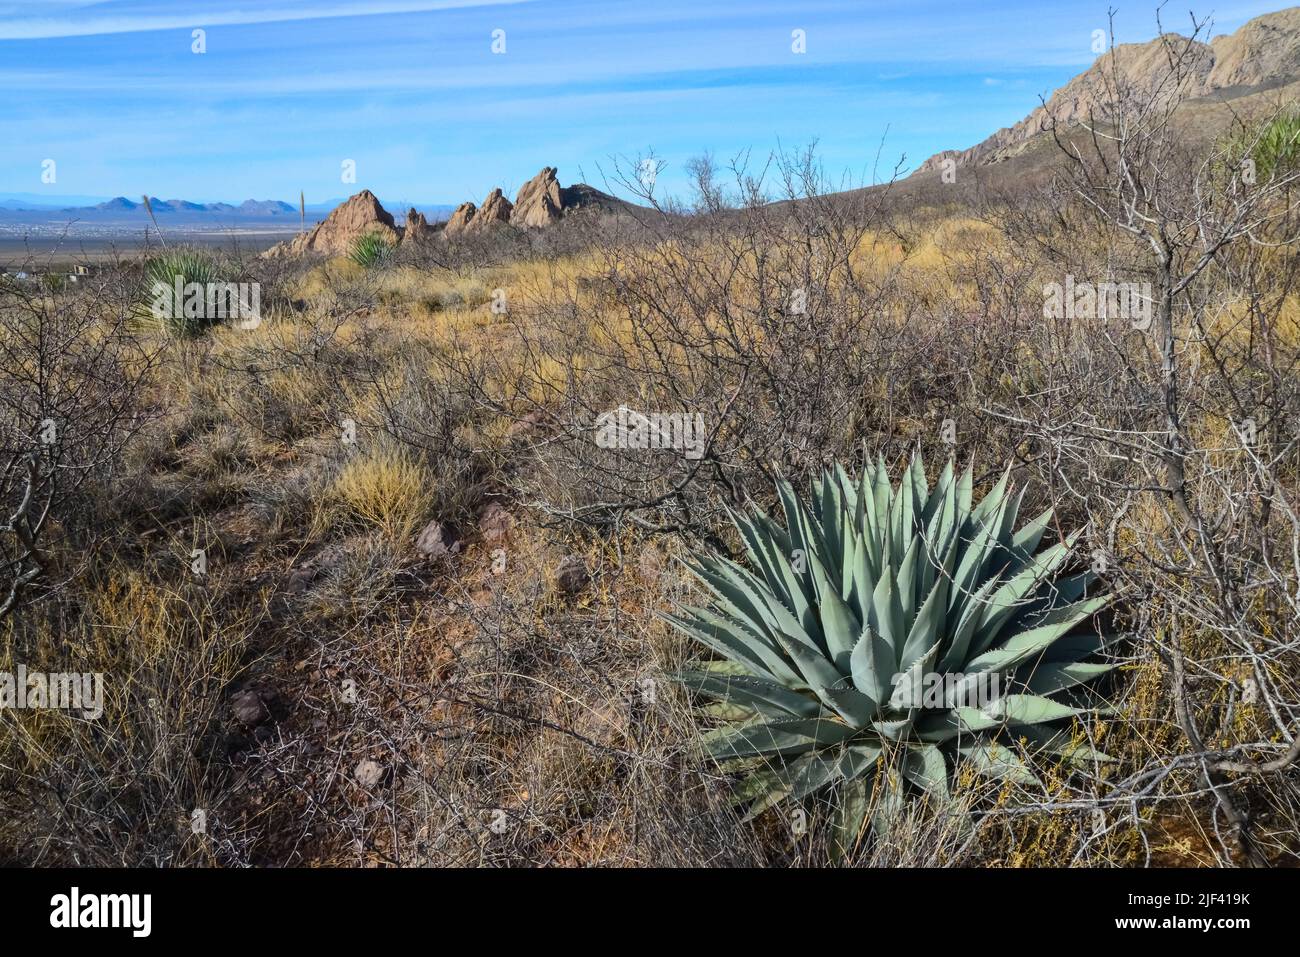 Desert landscape with dry plants, in the foreground is large Agave, New Mexico, USA Stock Photo